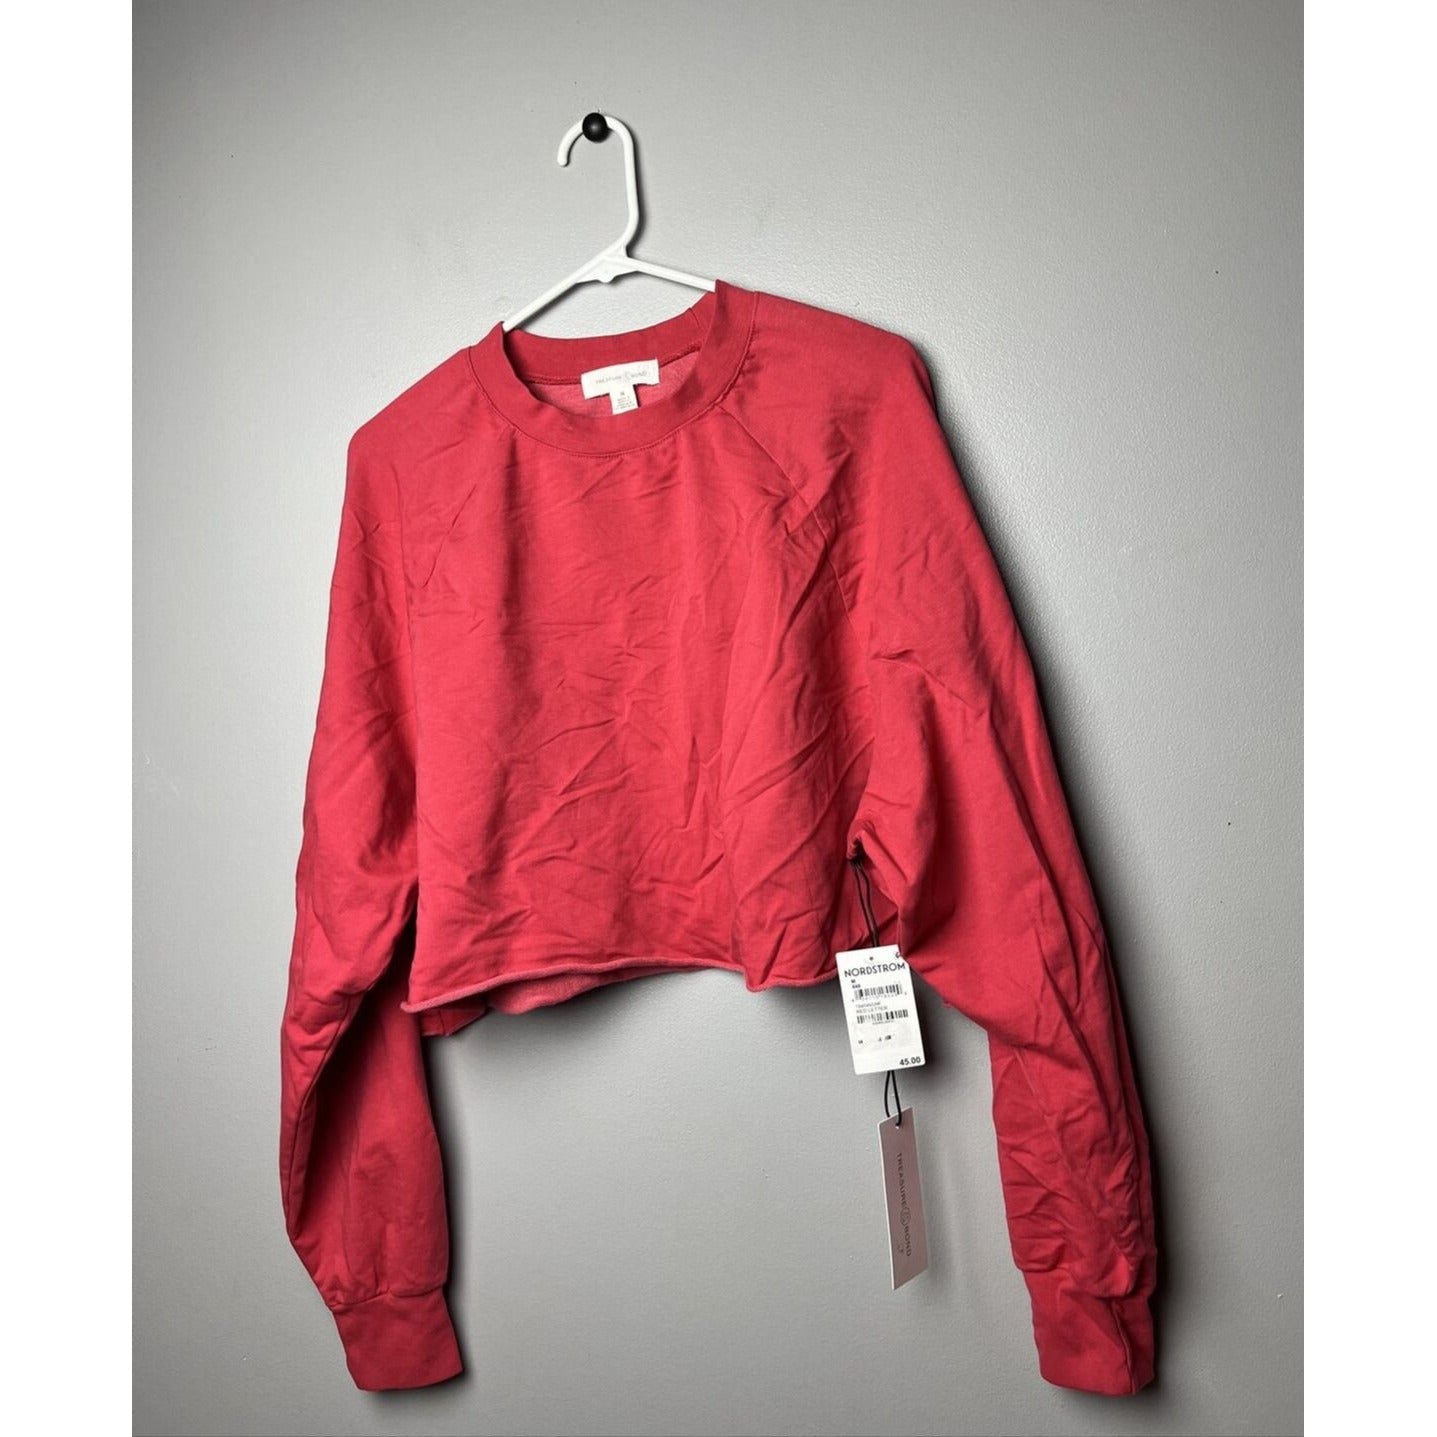 Treasure and Bond Relaxed fit Cropped Crew neck Red letter Pullover sweatshirt M